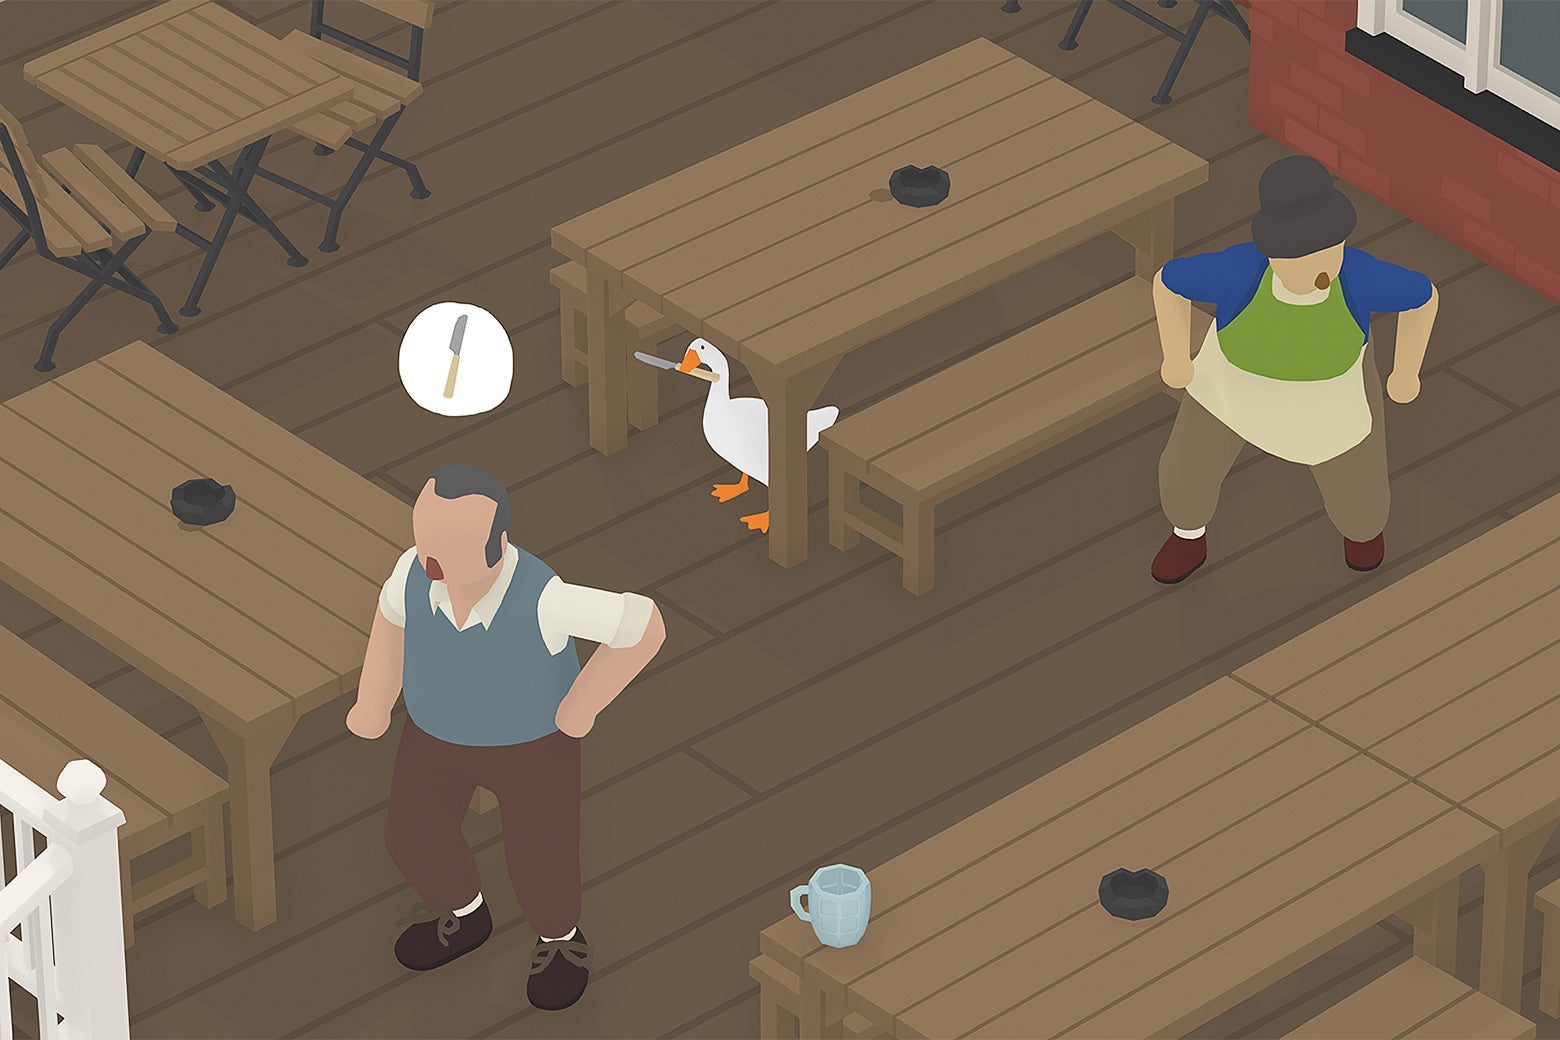 The goose hides under a table in a still from Untitled Goose Game.